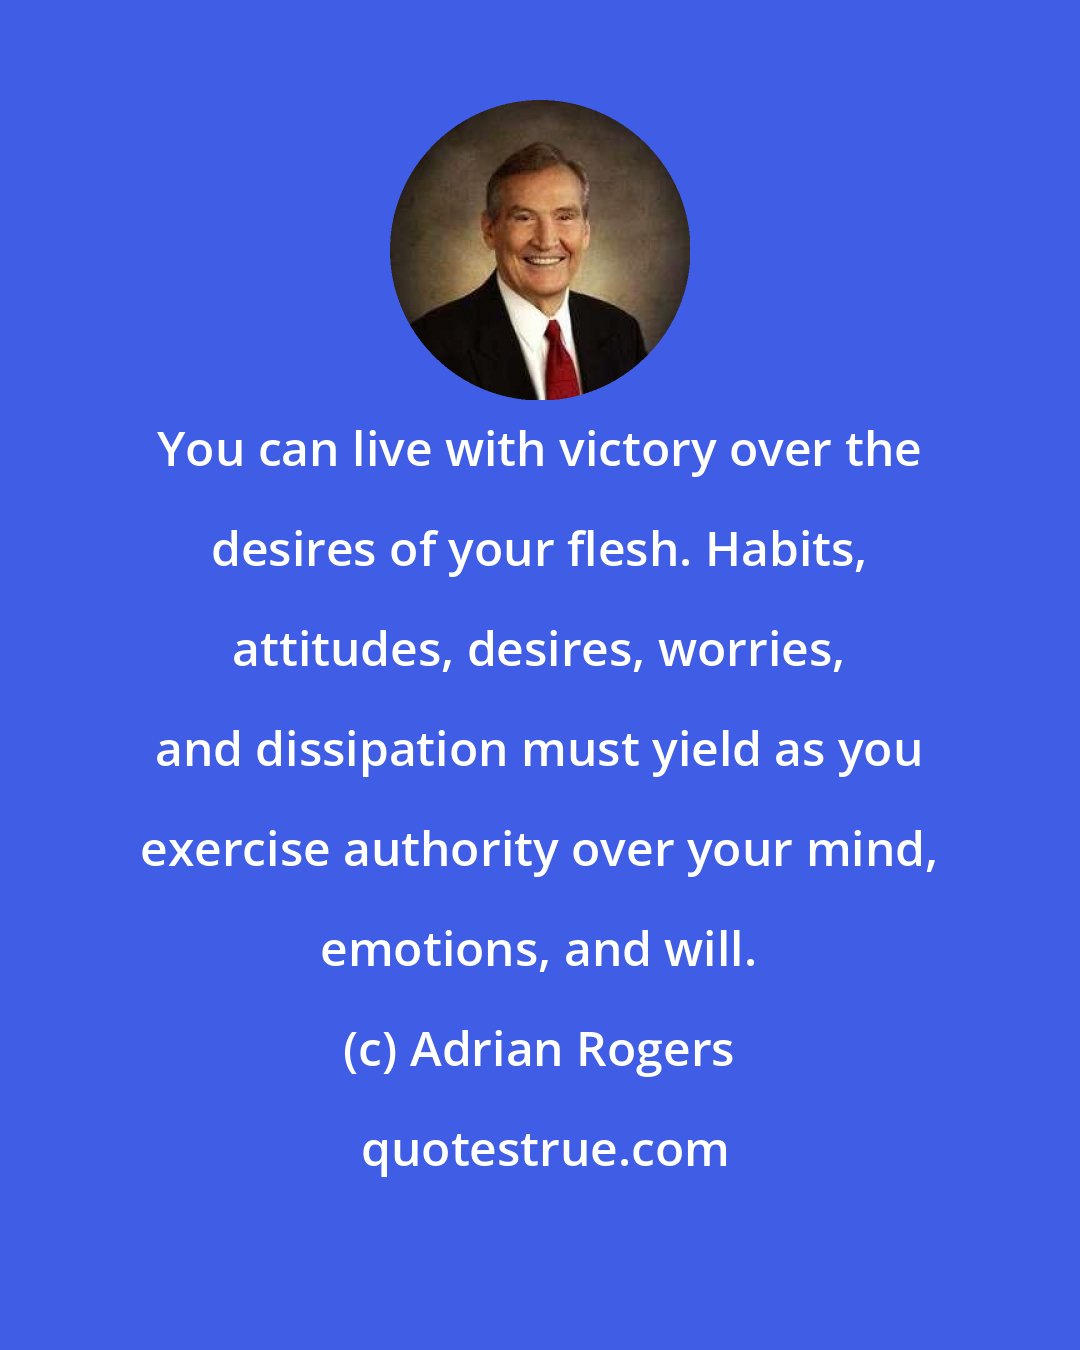 Adrian Rogers: You can live with victory over the desires of your flesh. Habits, attitudes, desires, worries, and dissipation must yield as you exercise authority over your mind, emotions, and will.